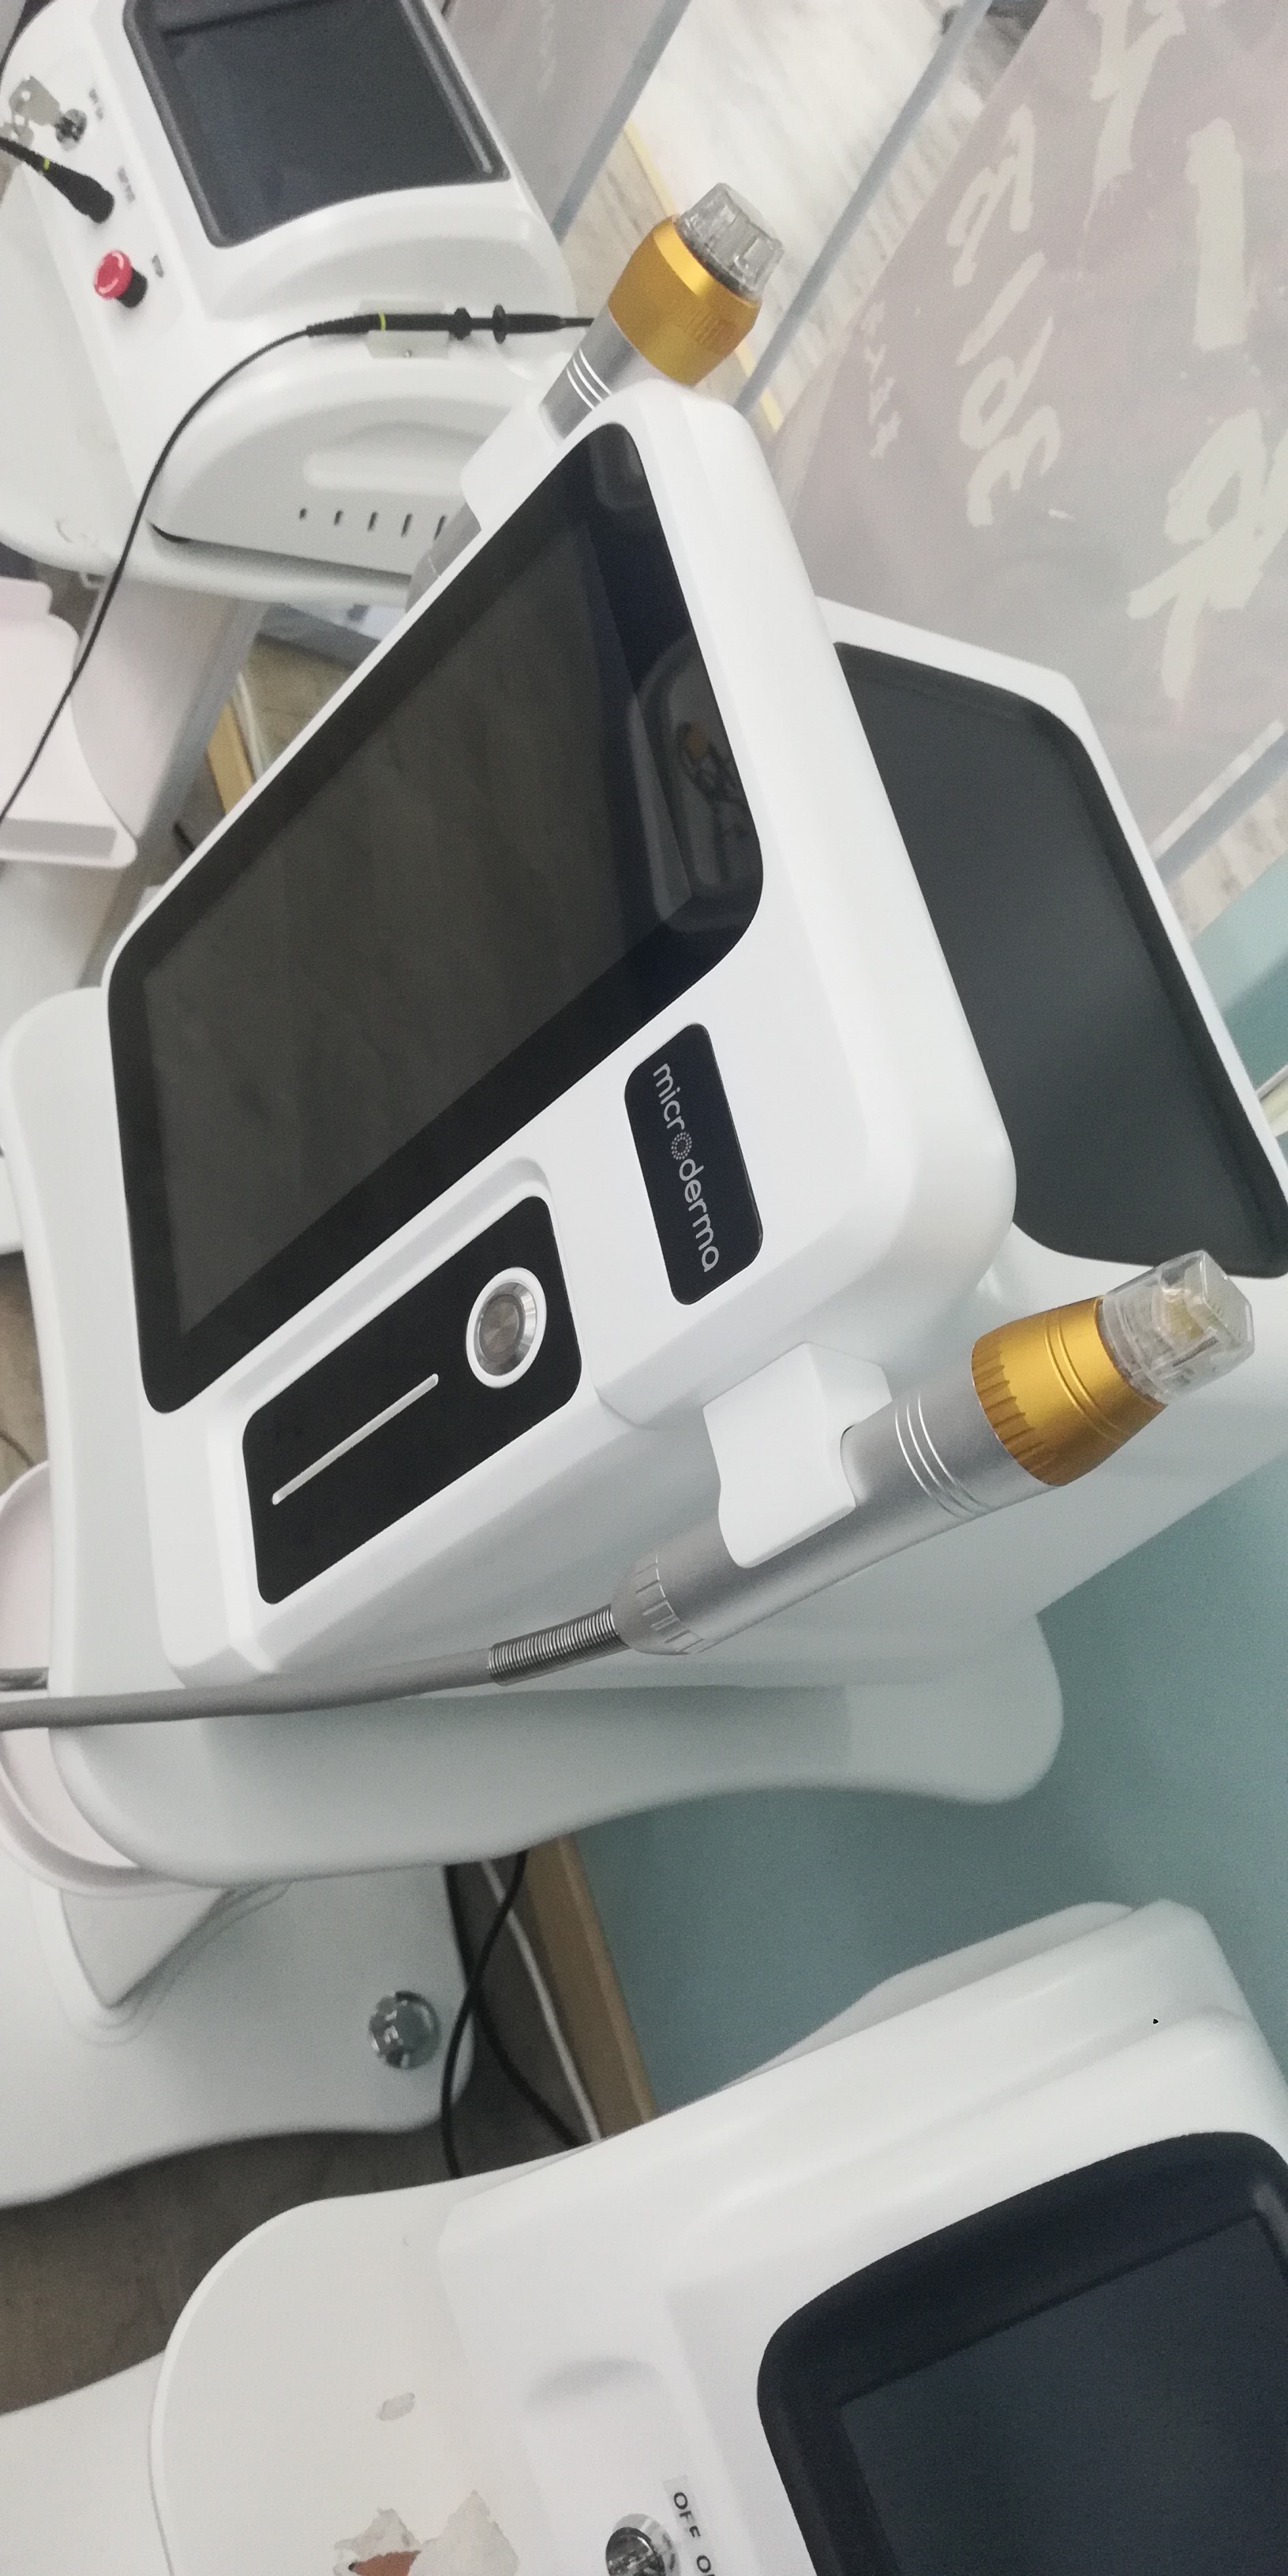 Other Health & Beauty Items rf microneedling machine microneedling pen microneedling rf